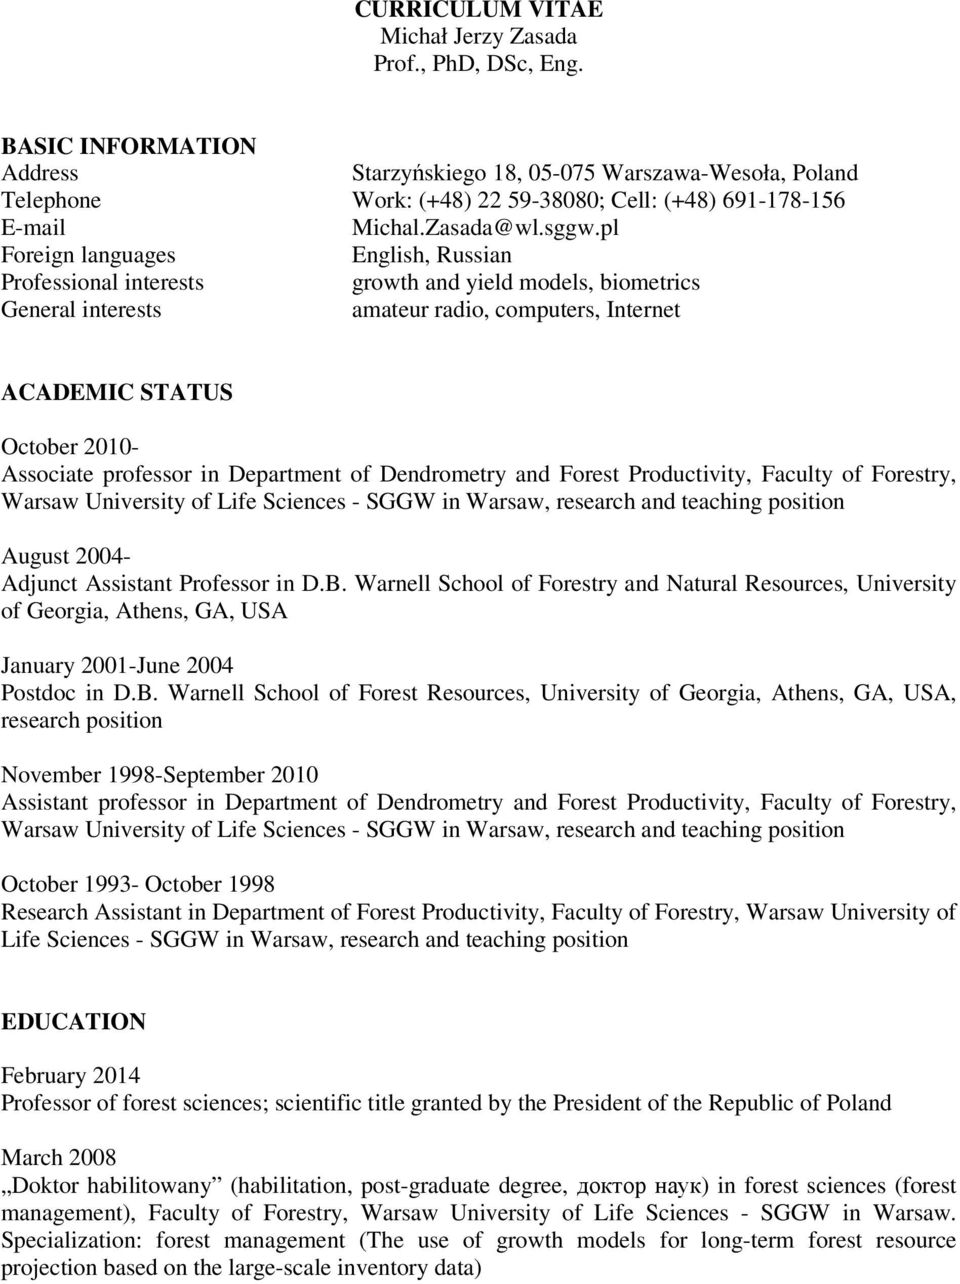 pl Foreign languages English, Russian Professional interests growth and yield models, biometrics General interests amateur radio, computers, Internet ACADEMIC STATUS October 2010- Associate professor